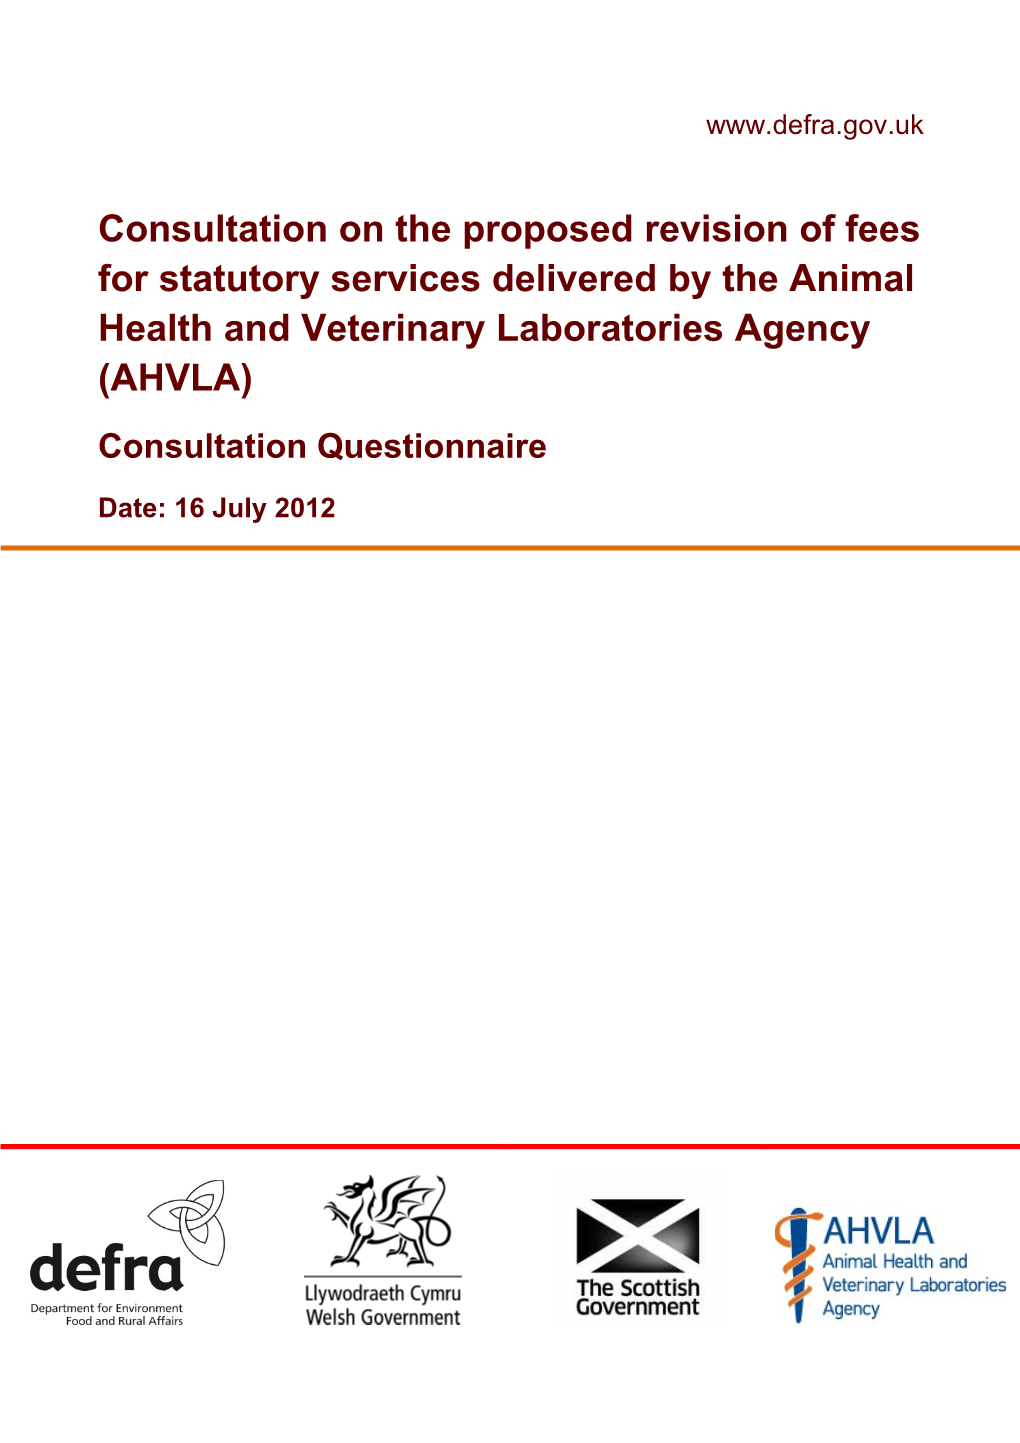 Consultation on the Proposed Revisionof Fees for Statutory Services Delivered by the Animal